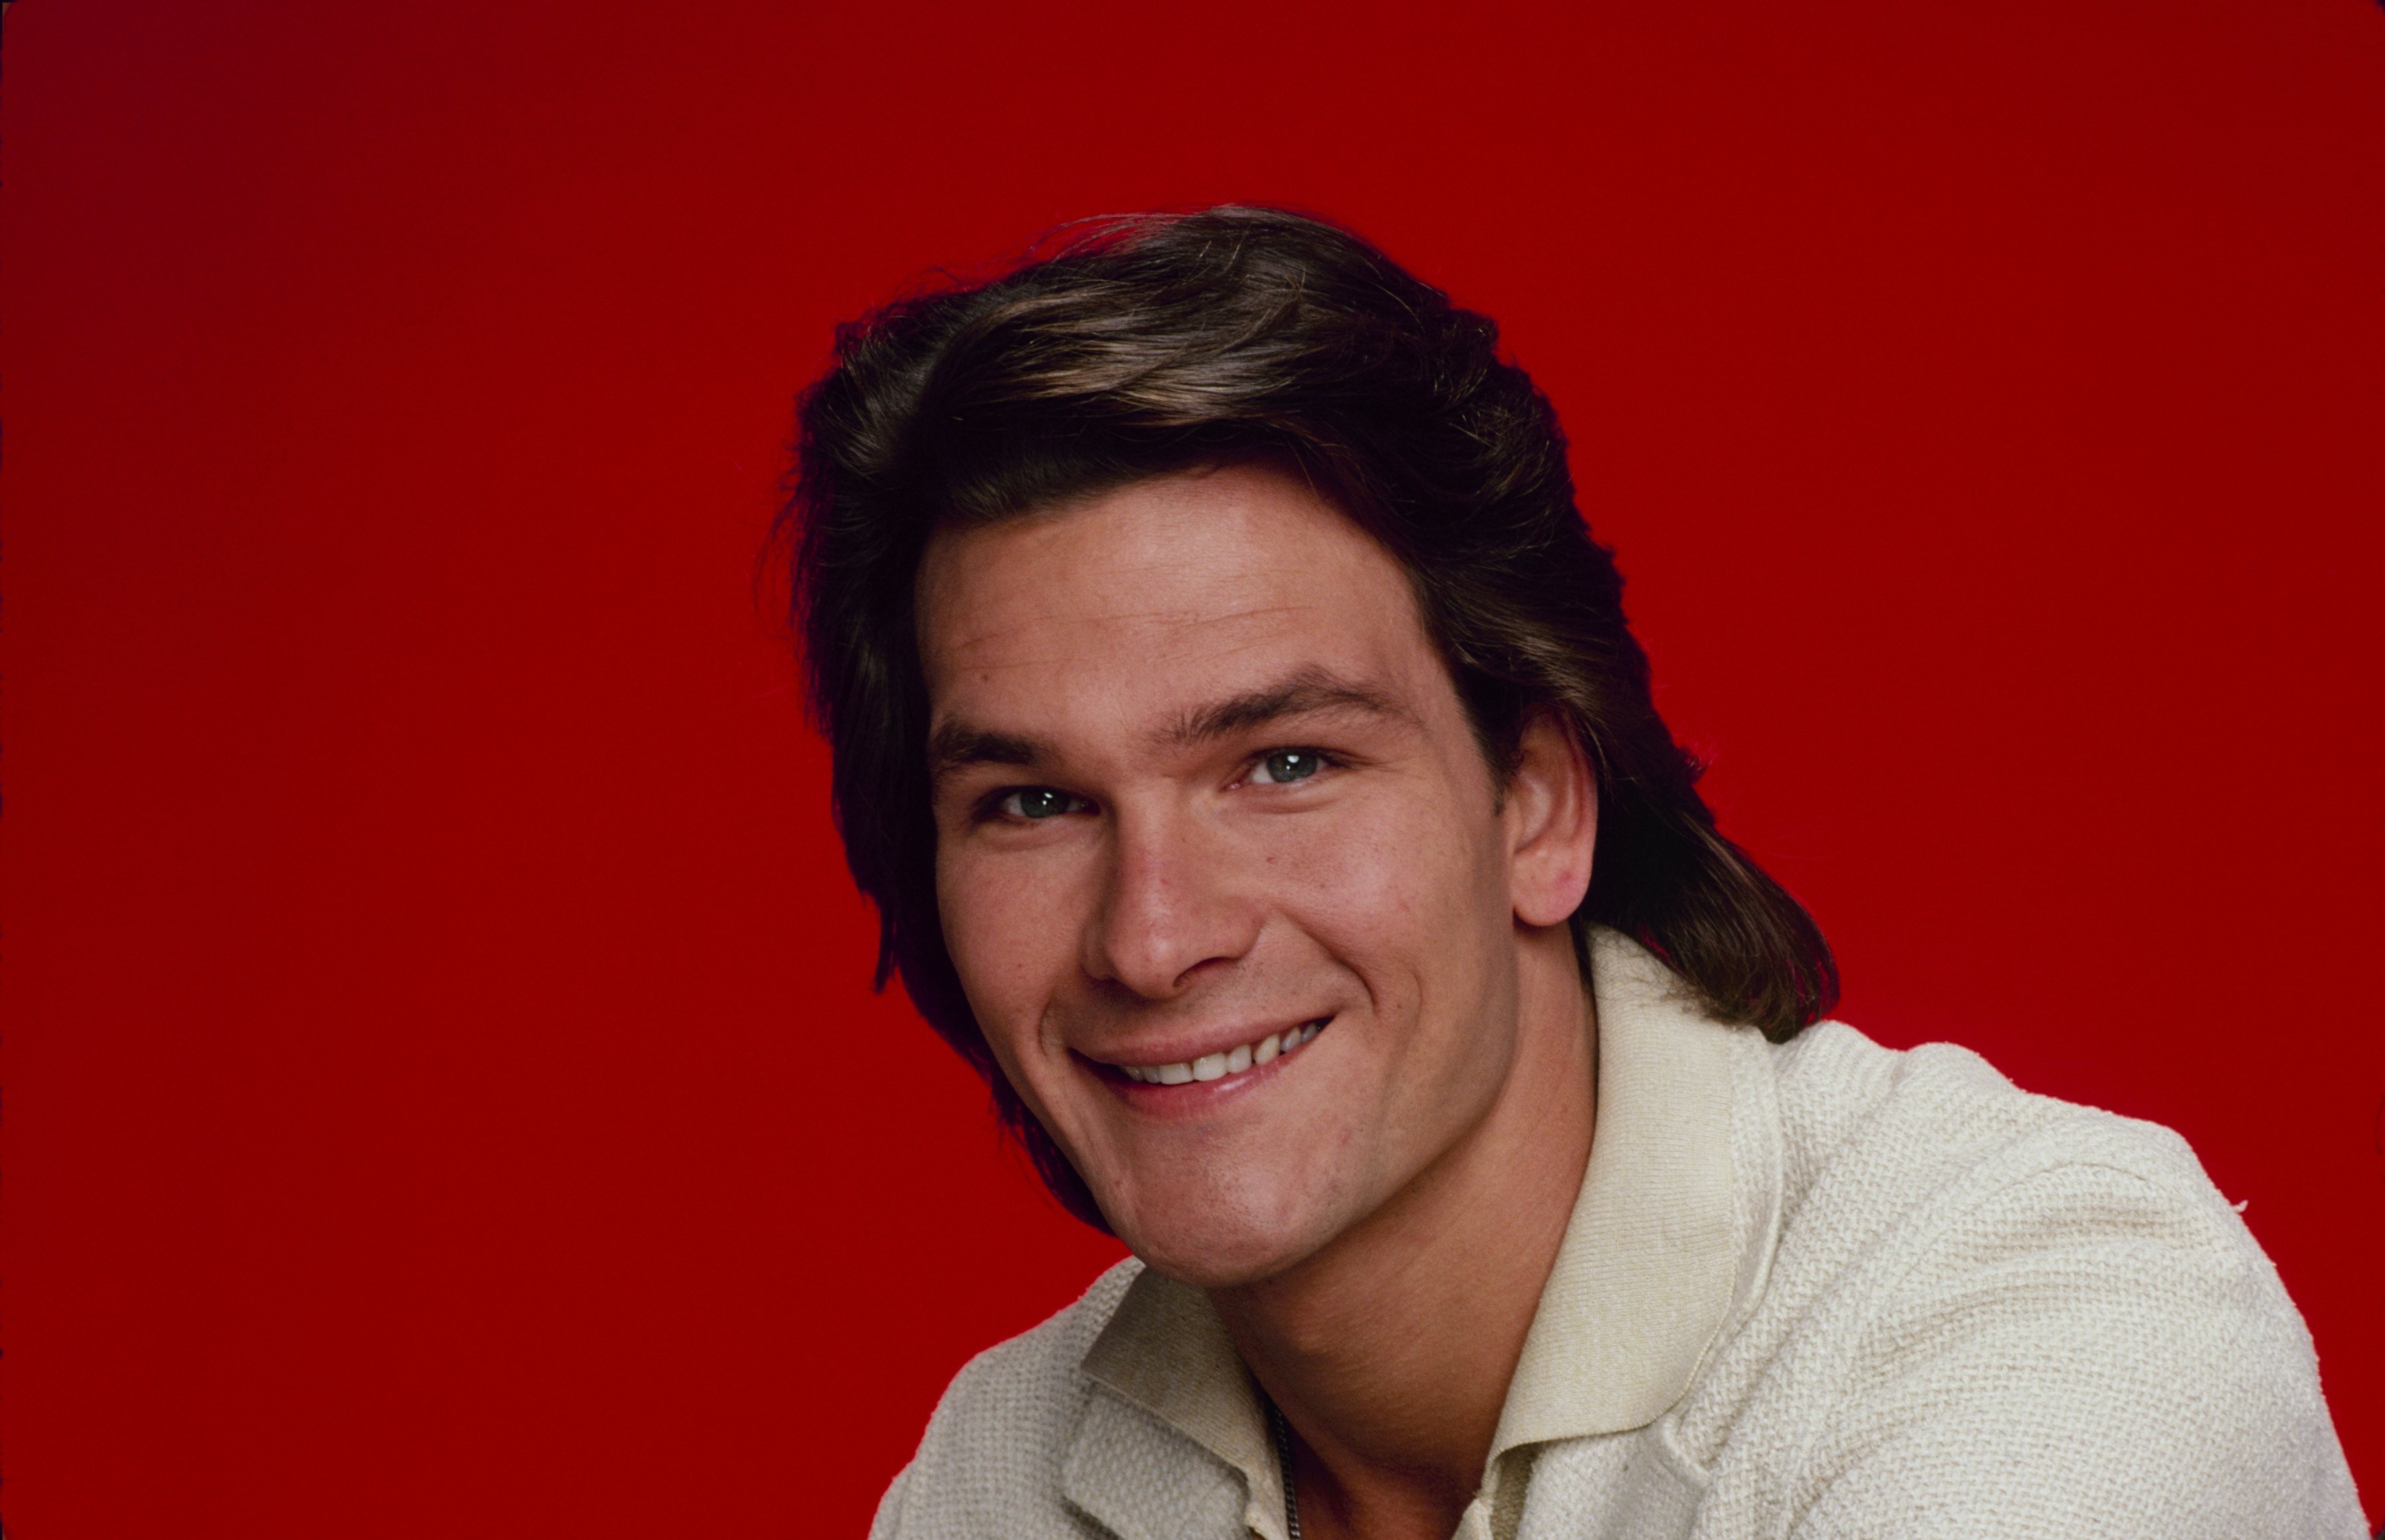 Patrick Swayze for "The Renegades" - Cast gallery 1982 | Photo: GettyImages